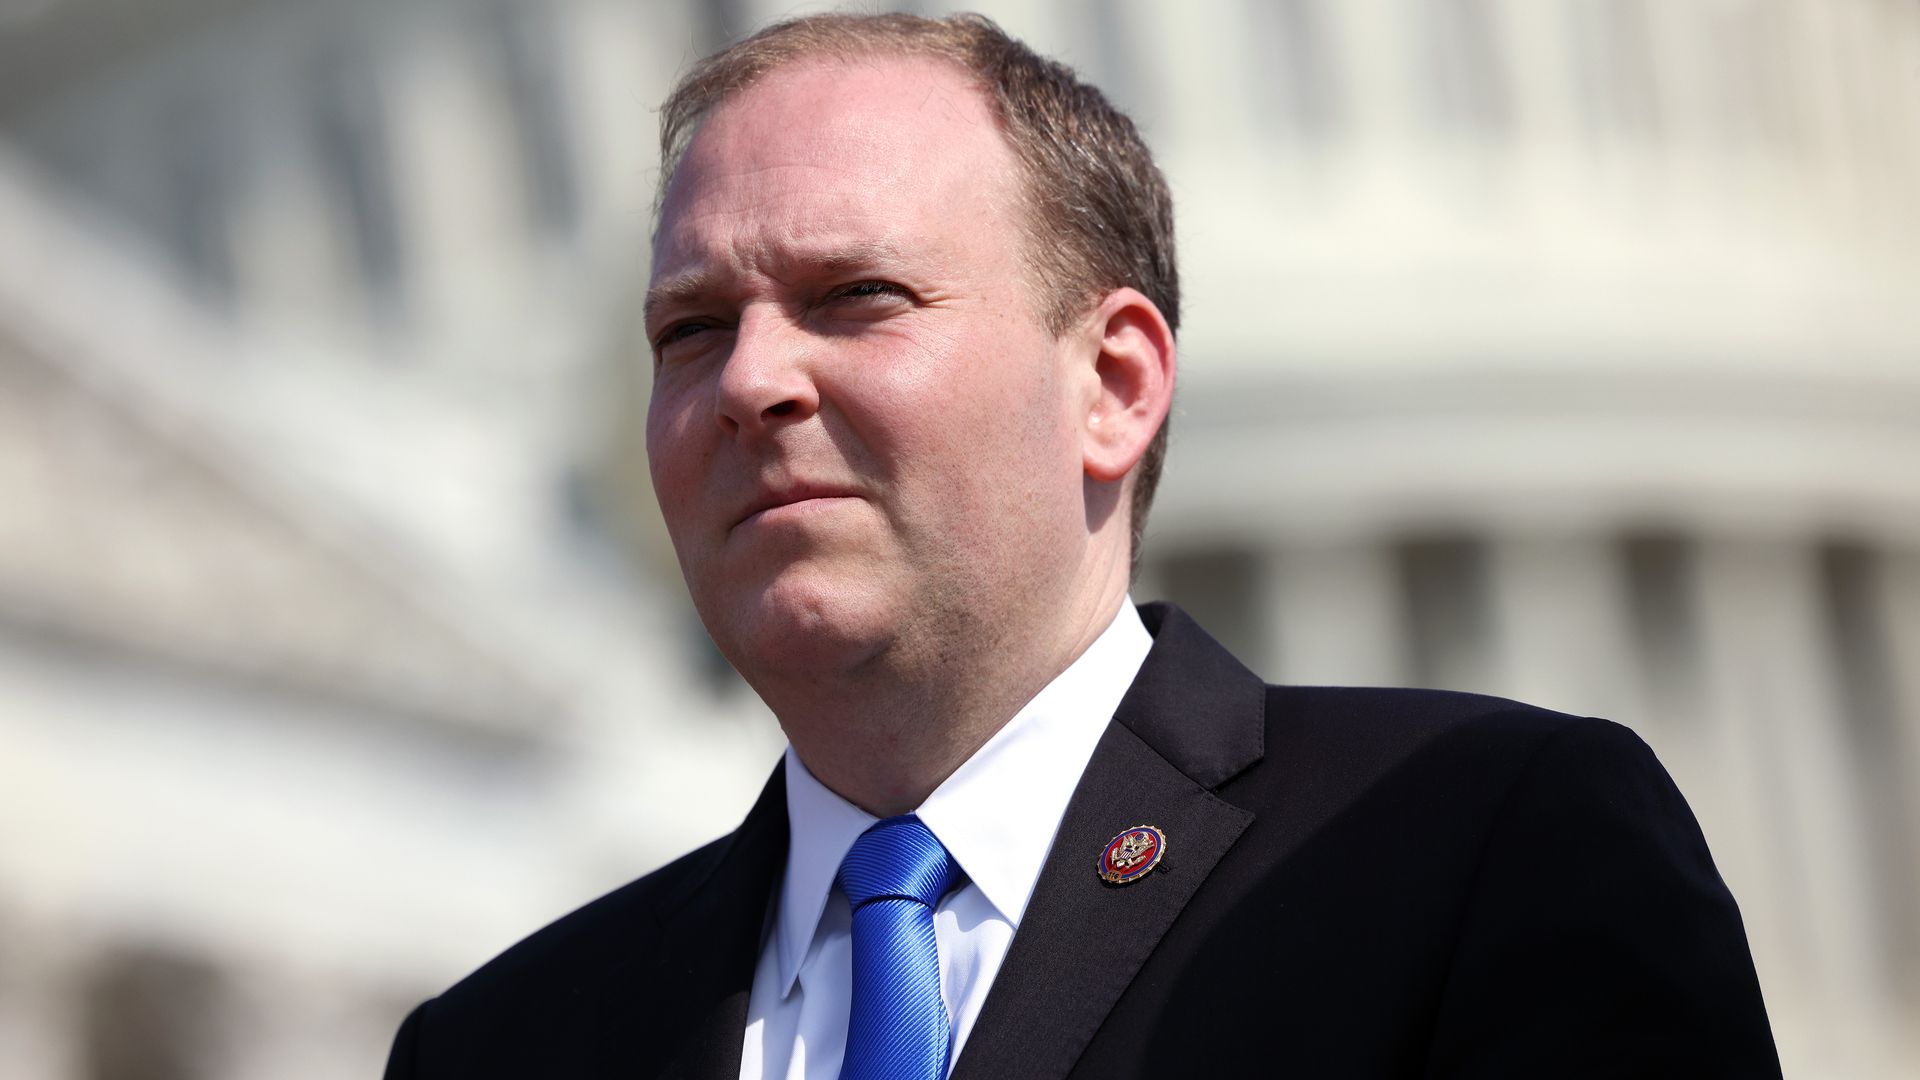 Rep. Lee Zeldin (R-NY) attends a press conference on the current conflict between Israel and the Palestinians on May 20, 2021.